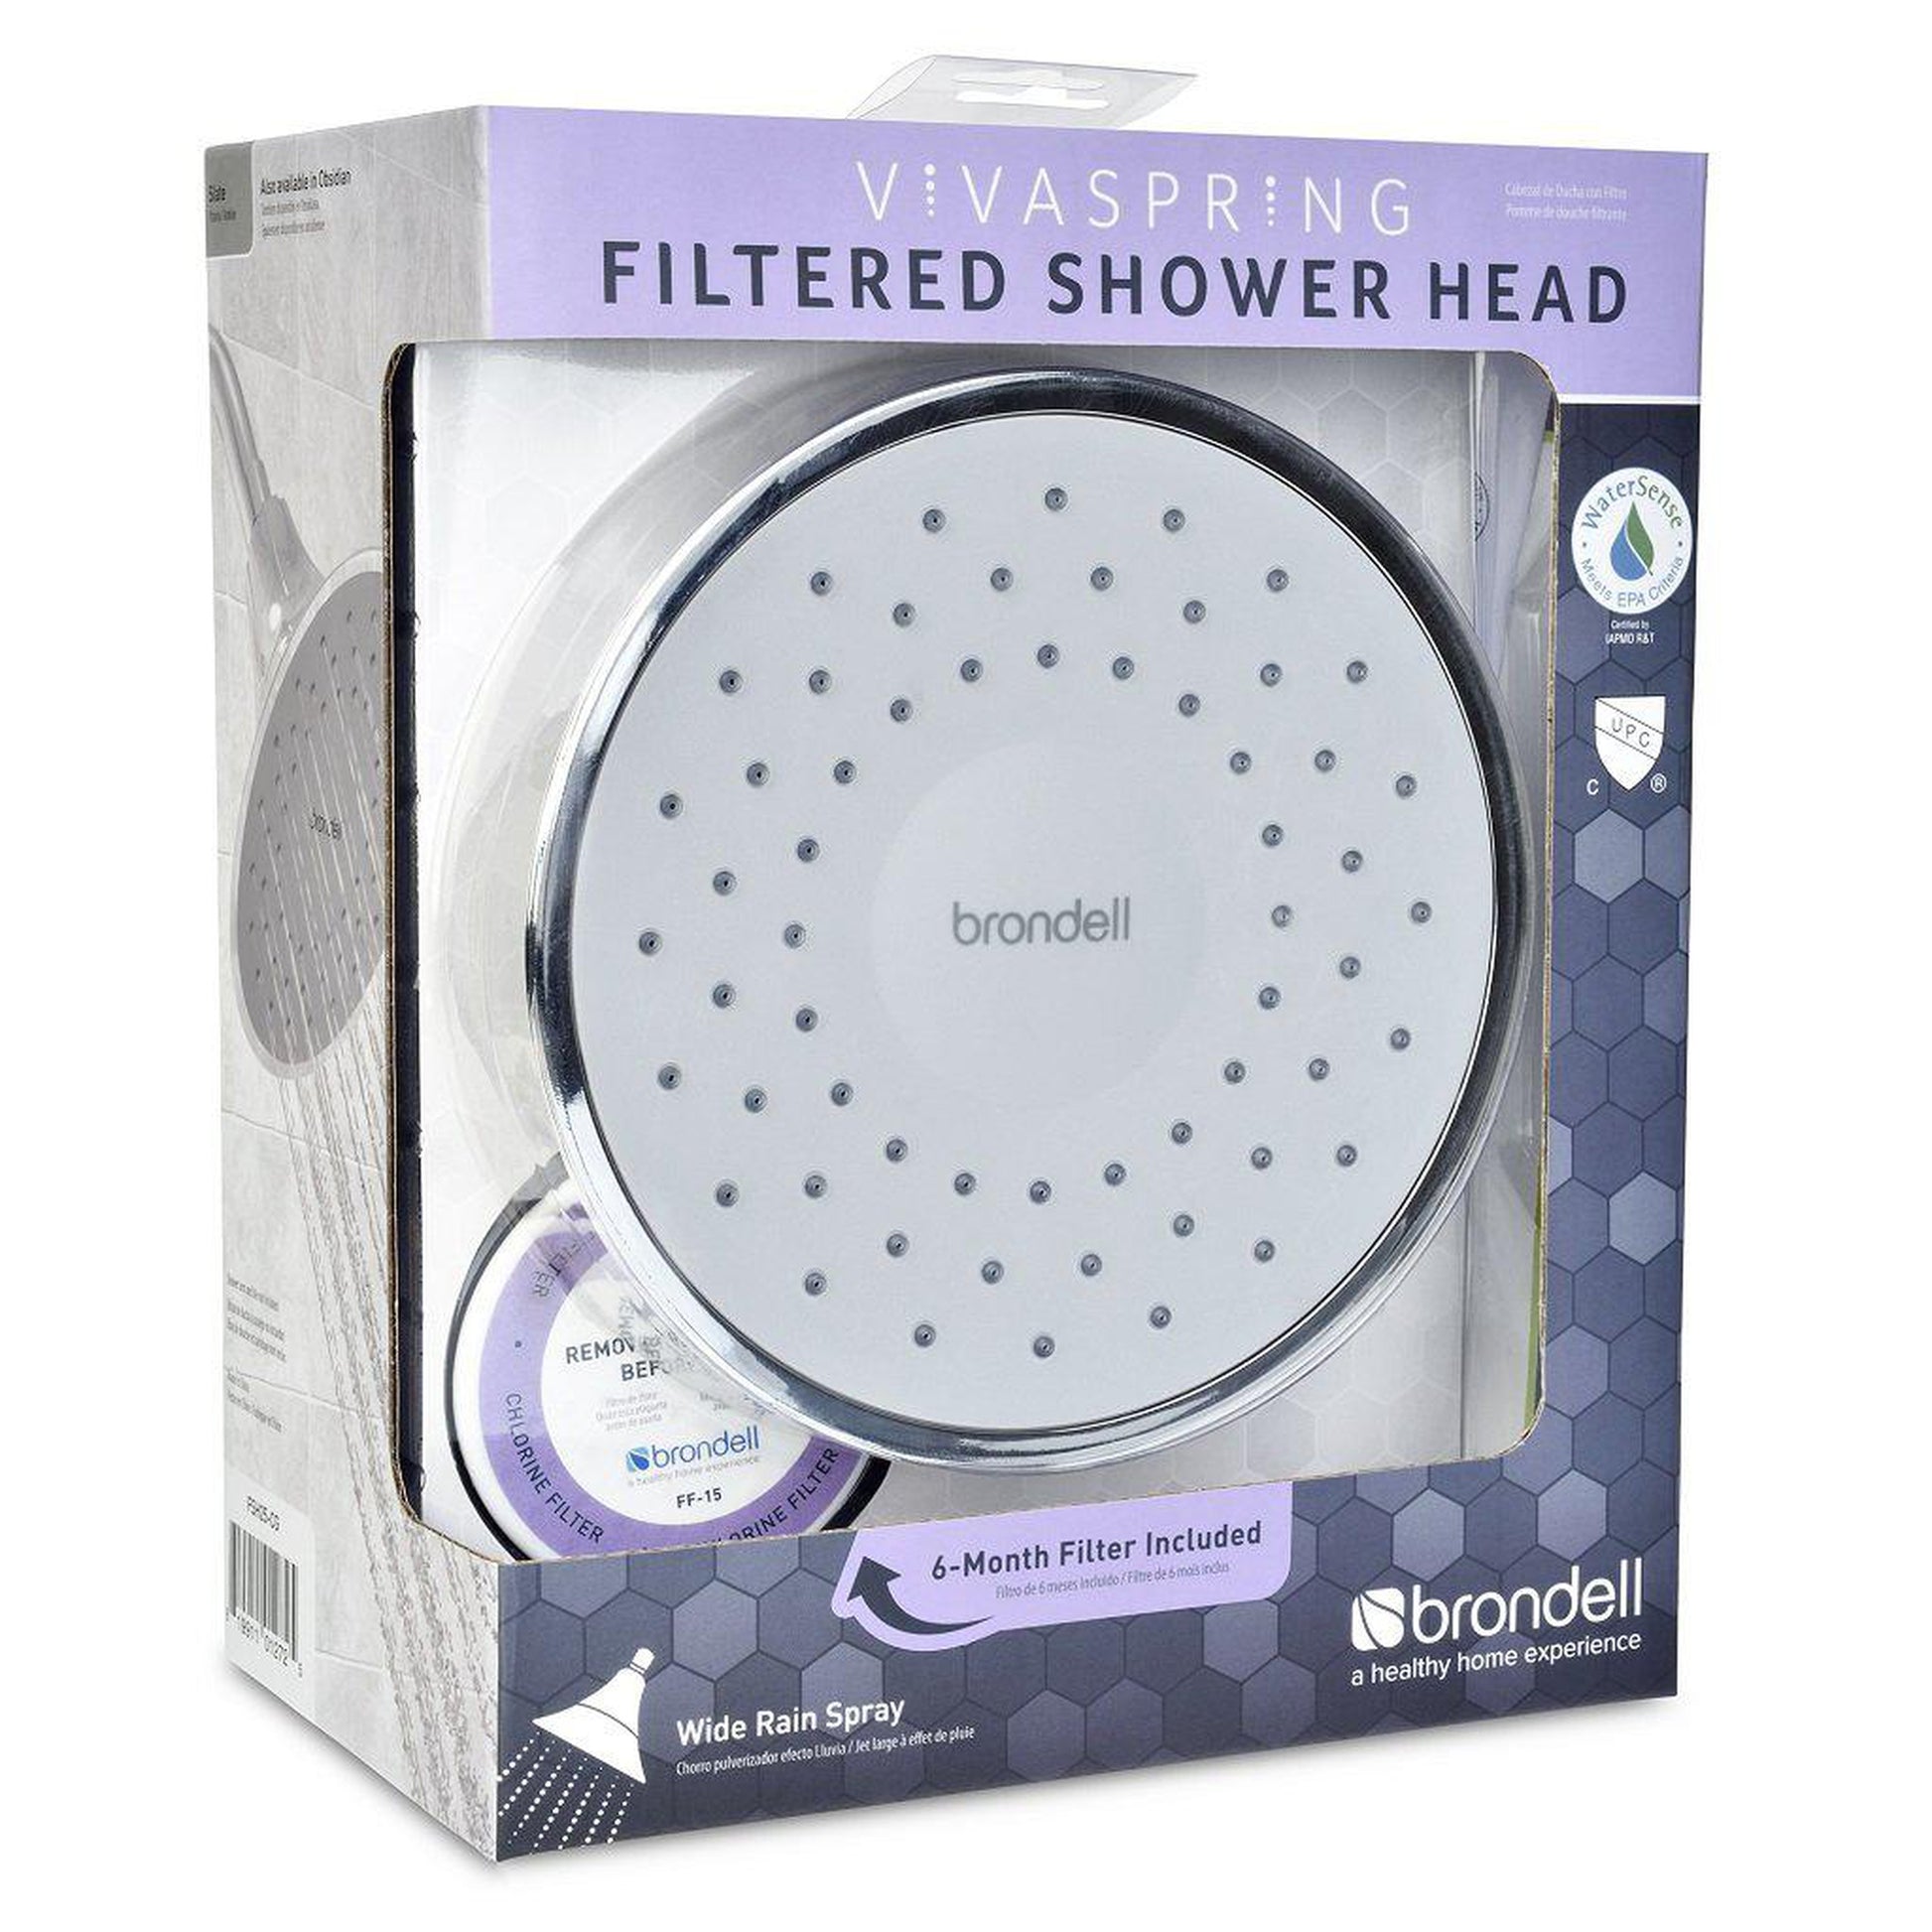 VivaSpring Filtered Shower Head, Chrome Finish with Obsidian face and Wide  Rain Spray, for softer skin and hair, 6 month filter FF-15